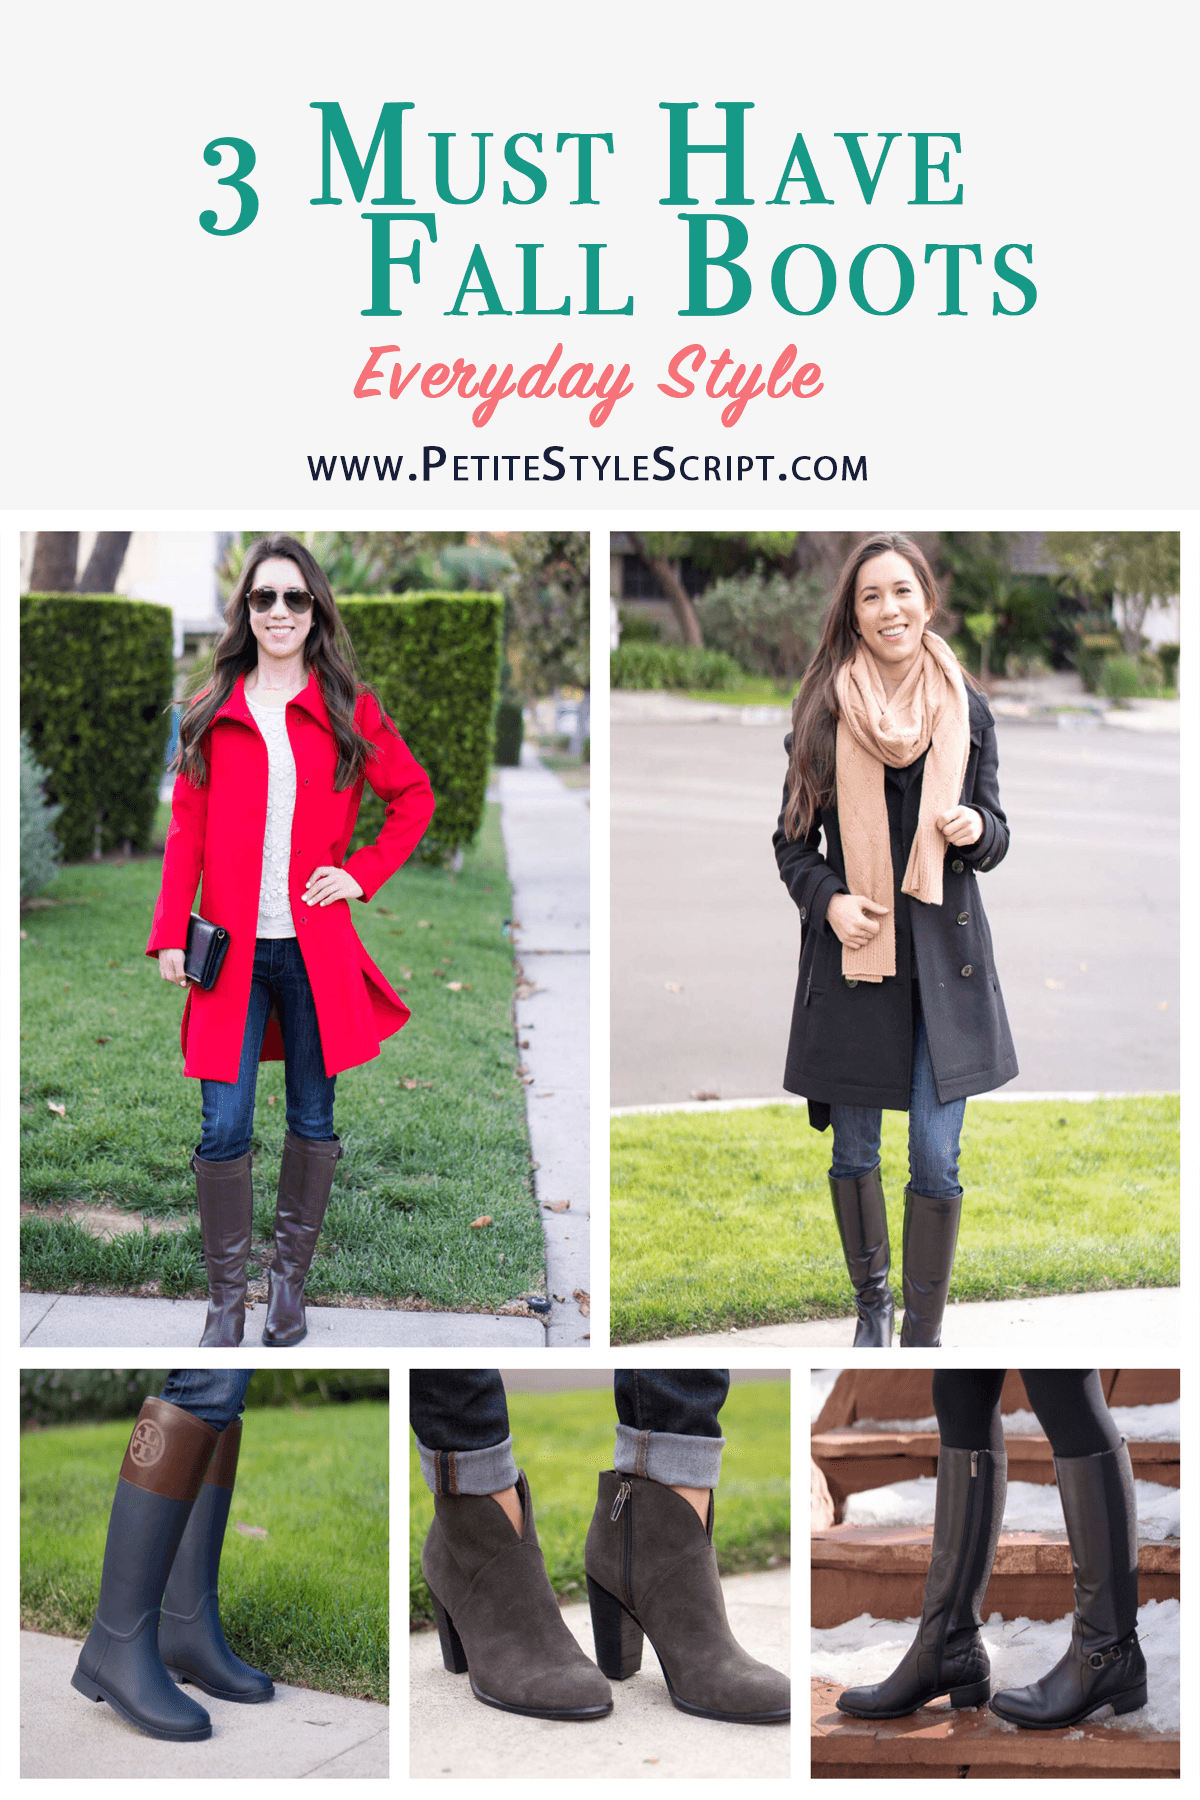 3 Must Have Boots for Fall - Petite Style Script